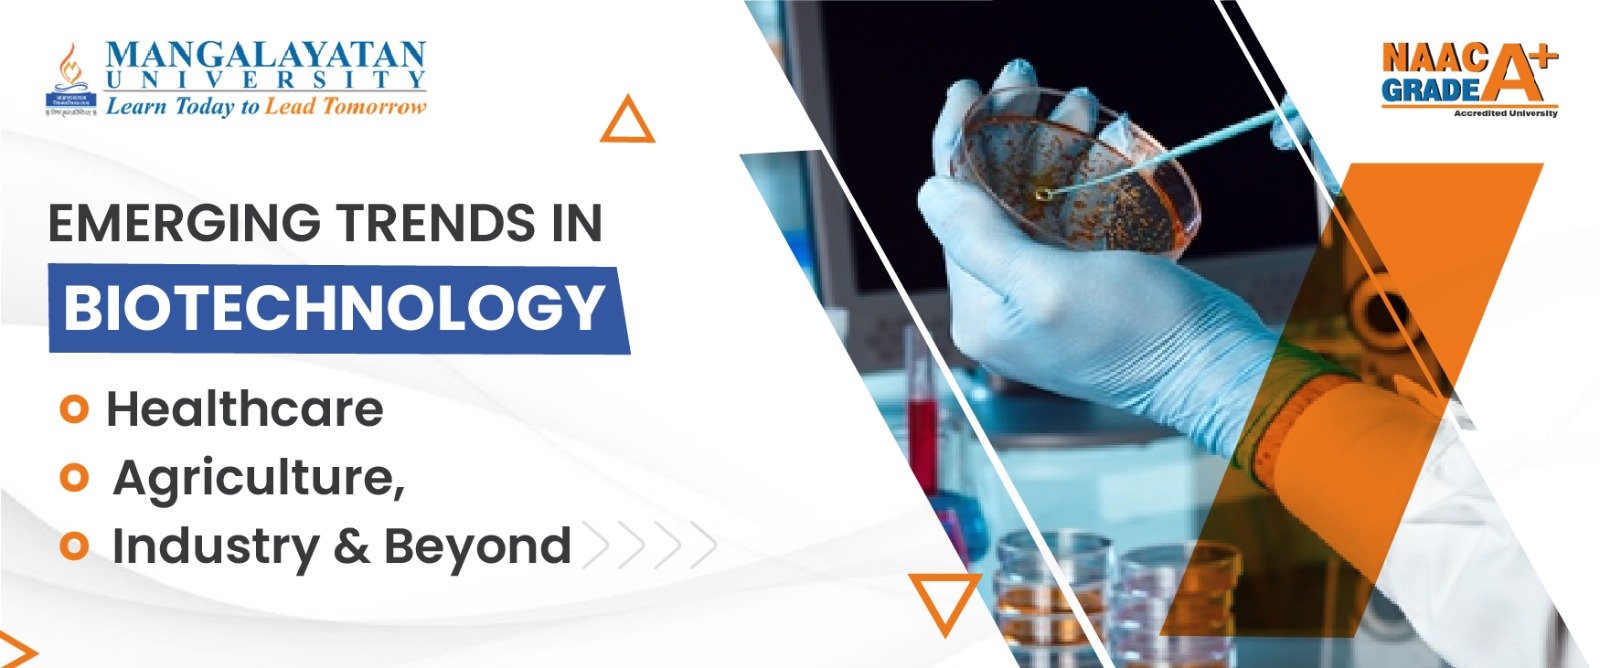 Emerging Trends in Biotechnology: Healthcare, Agriculture, Industry and Beyond